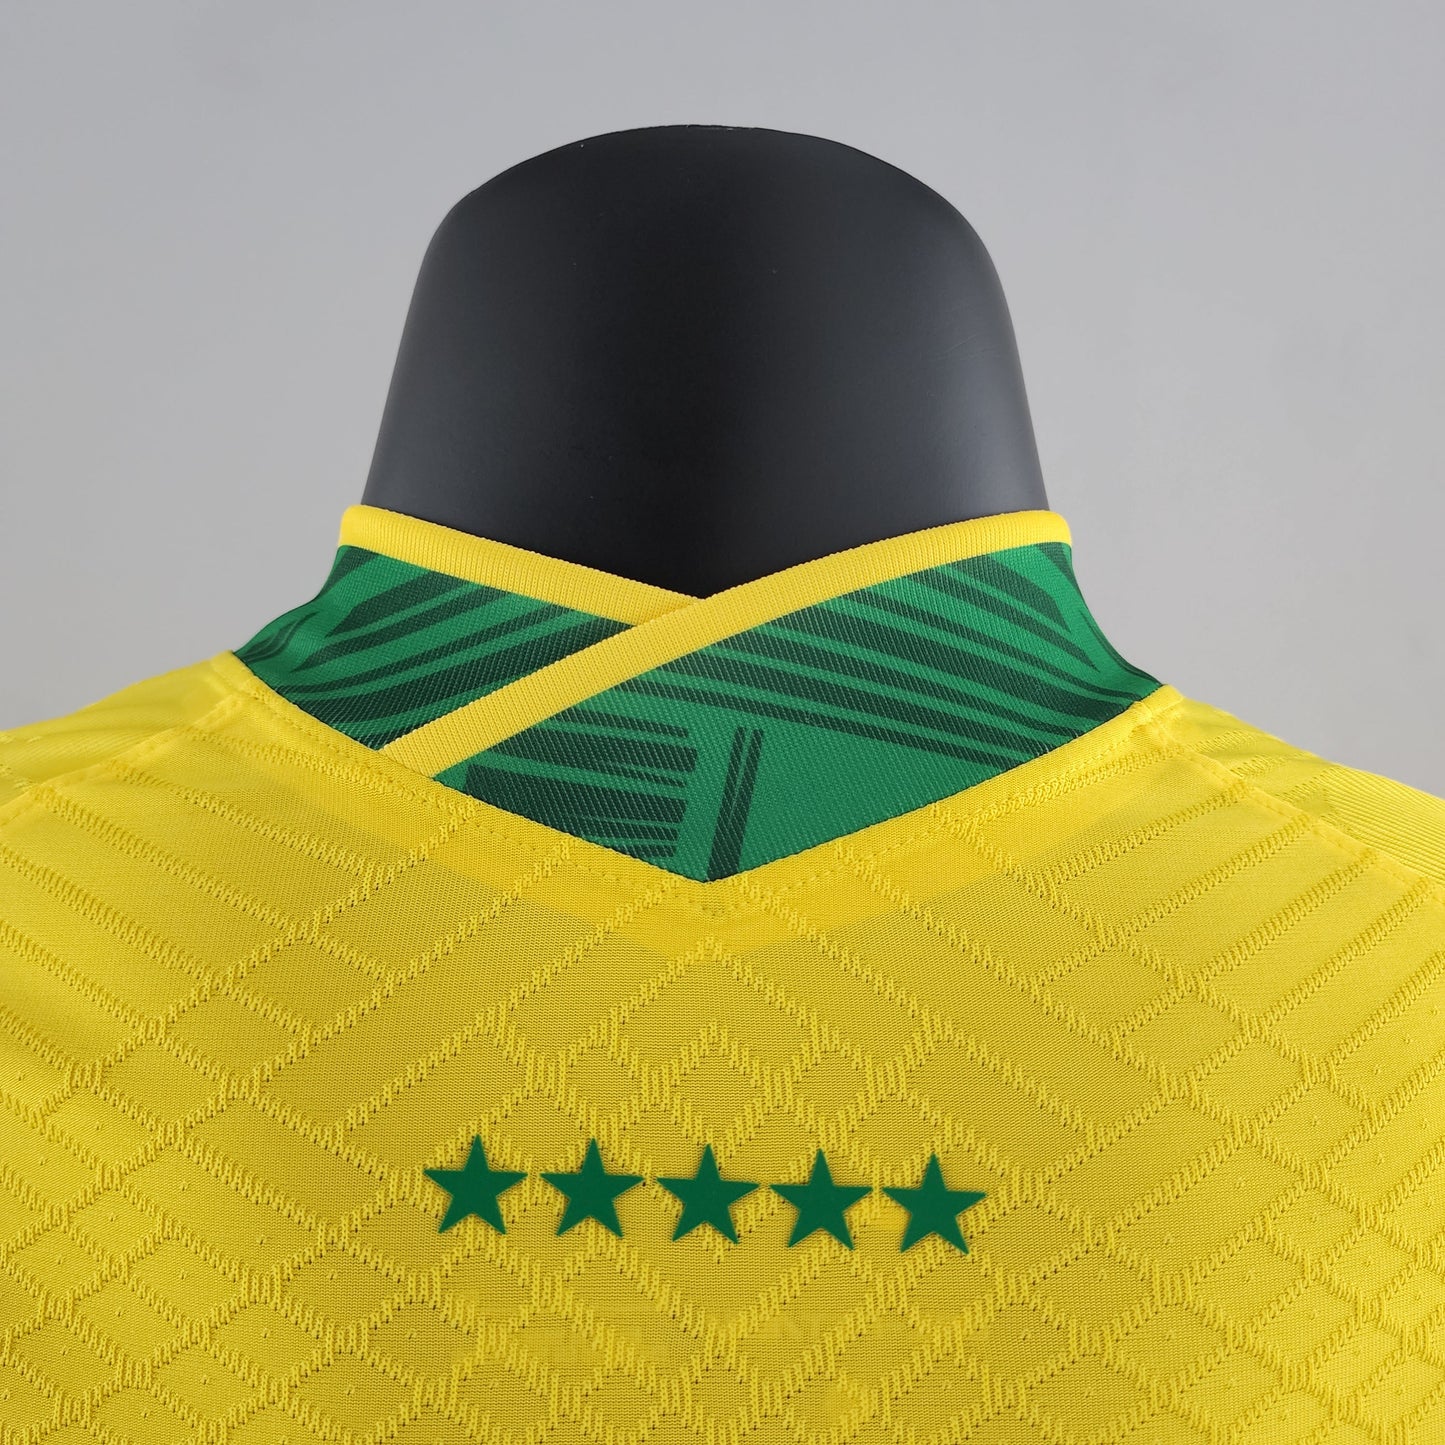 Brazil 23/24 Christ the Redeemer Special Edition